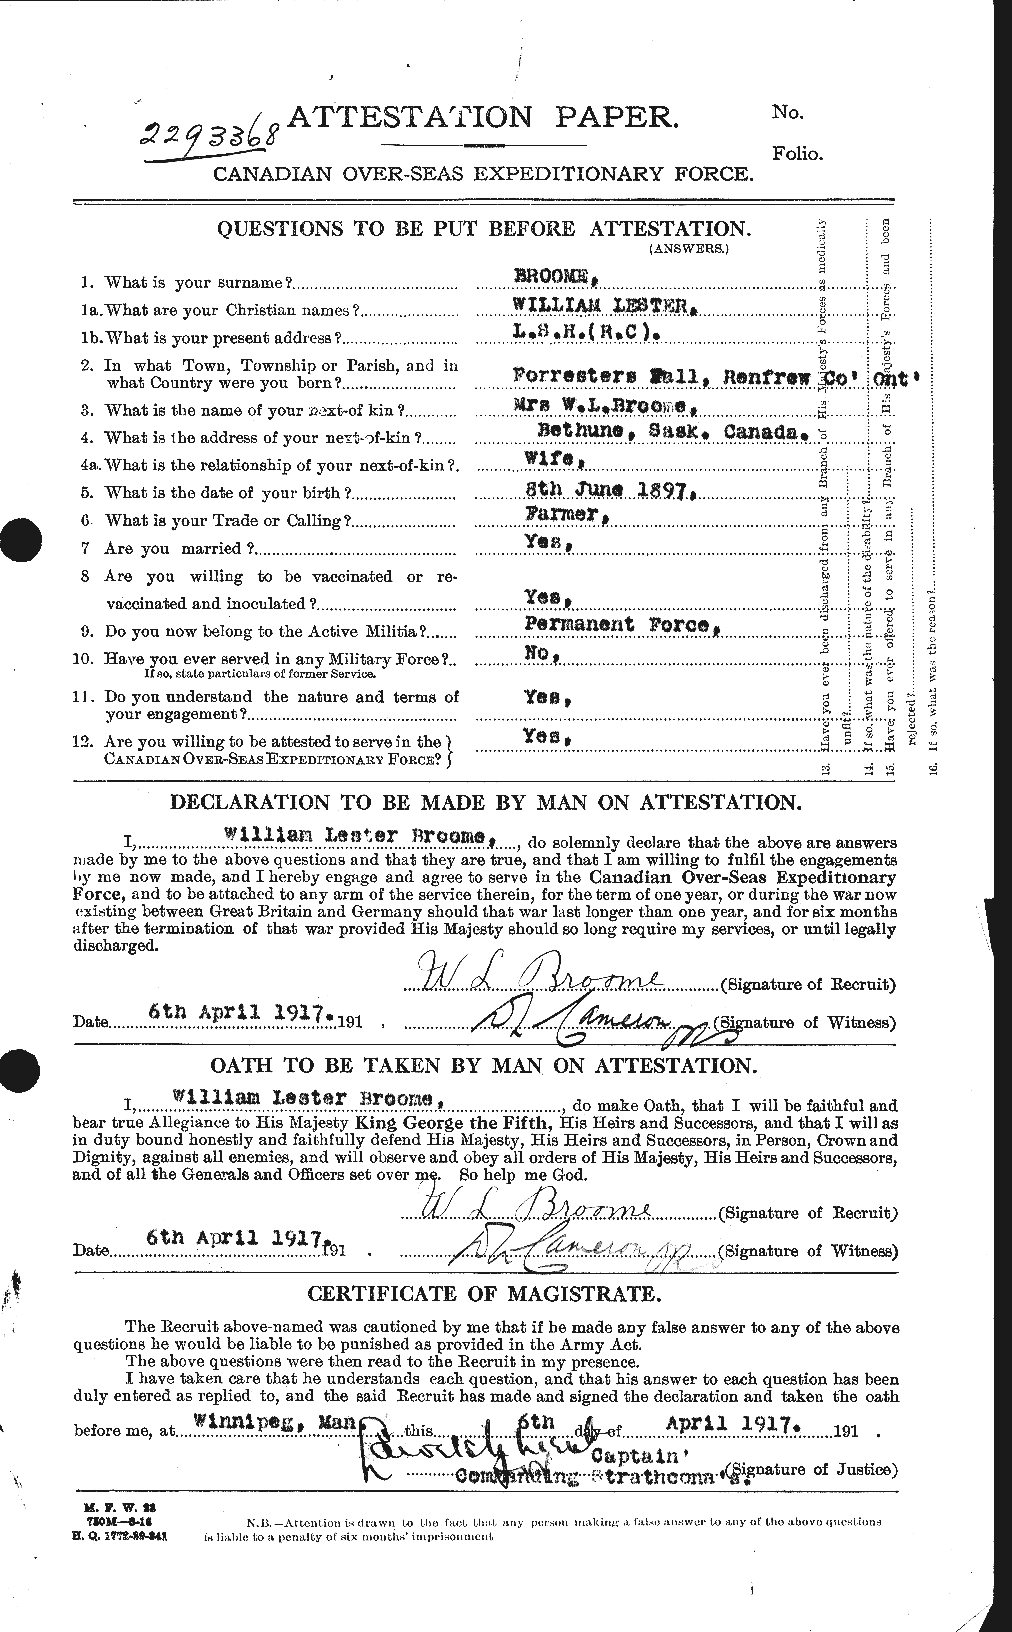 Personnel Records of the First World War - CEF 264815a